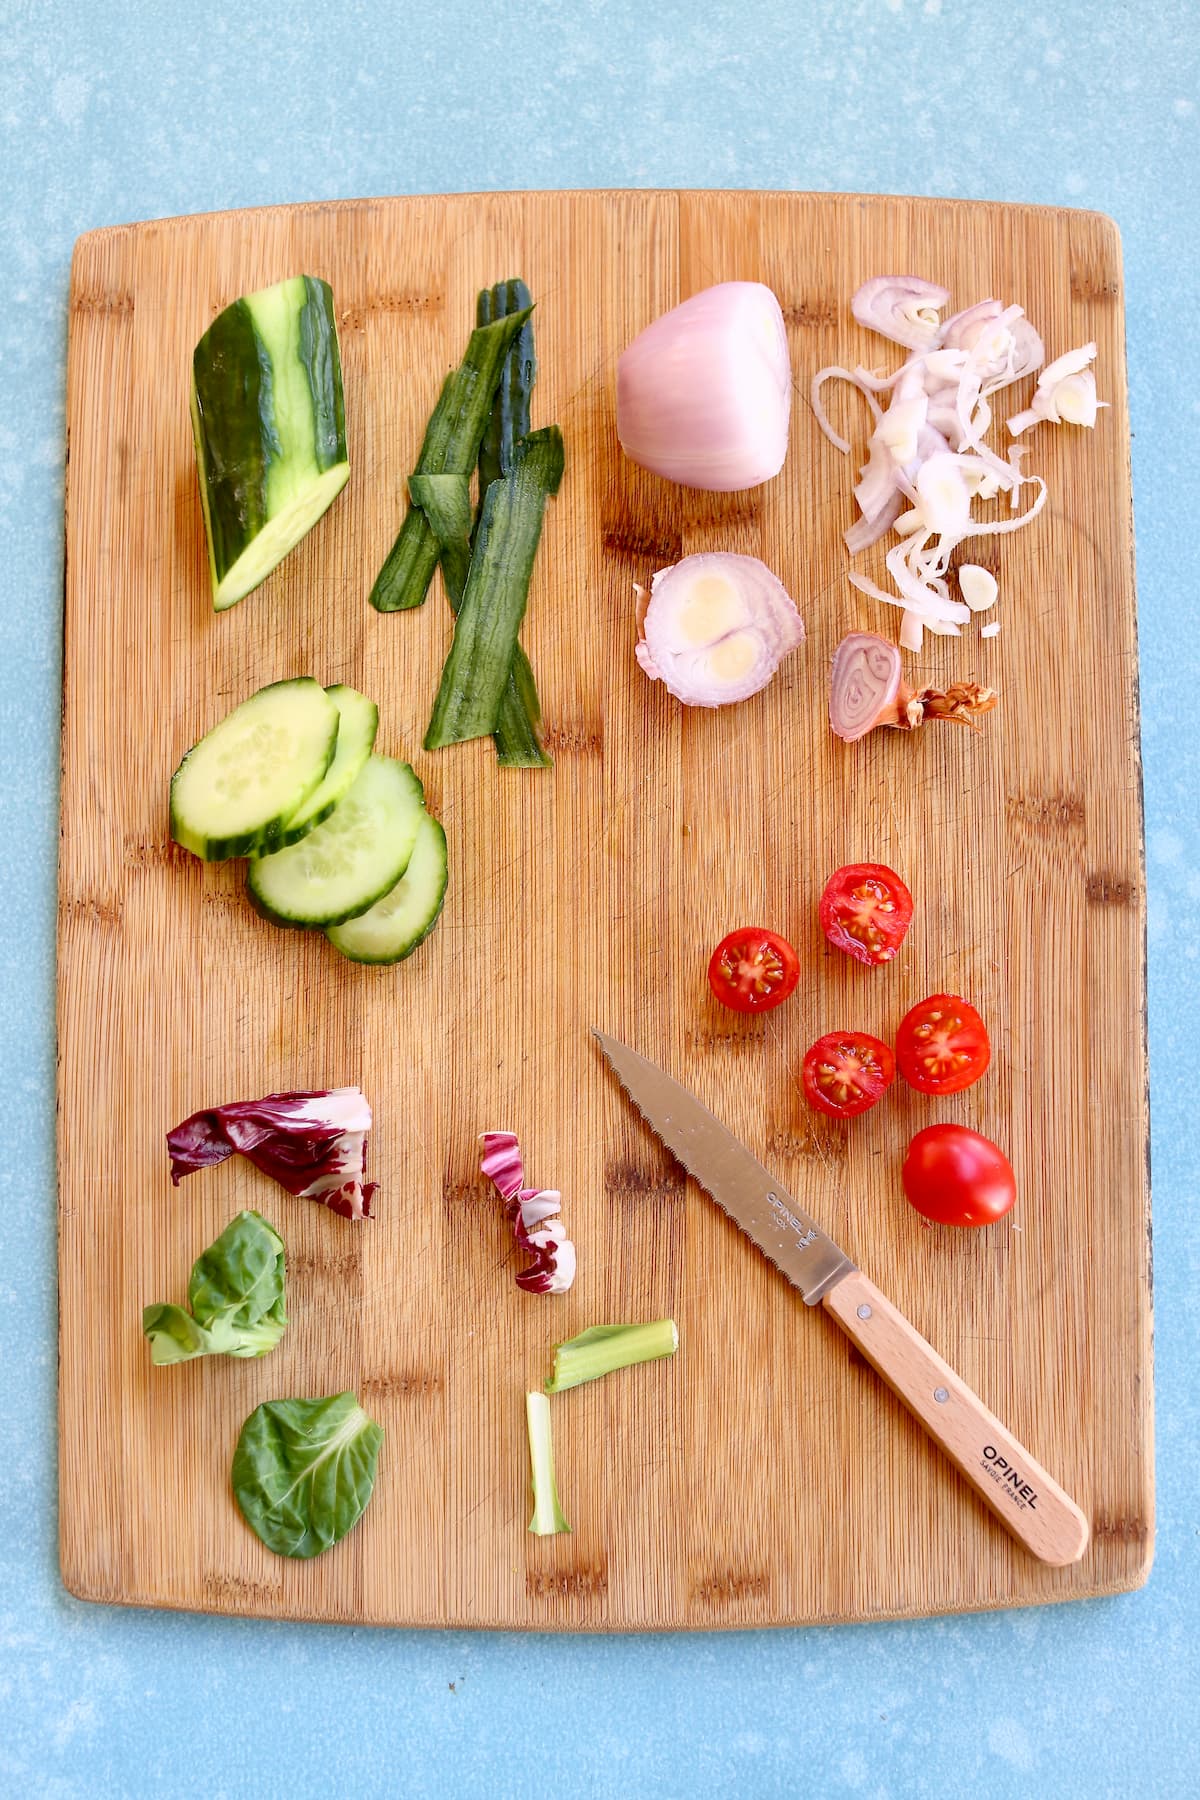 ingredients for a salad on a cutting board.